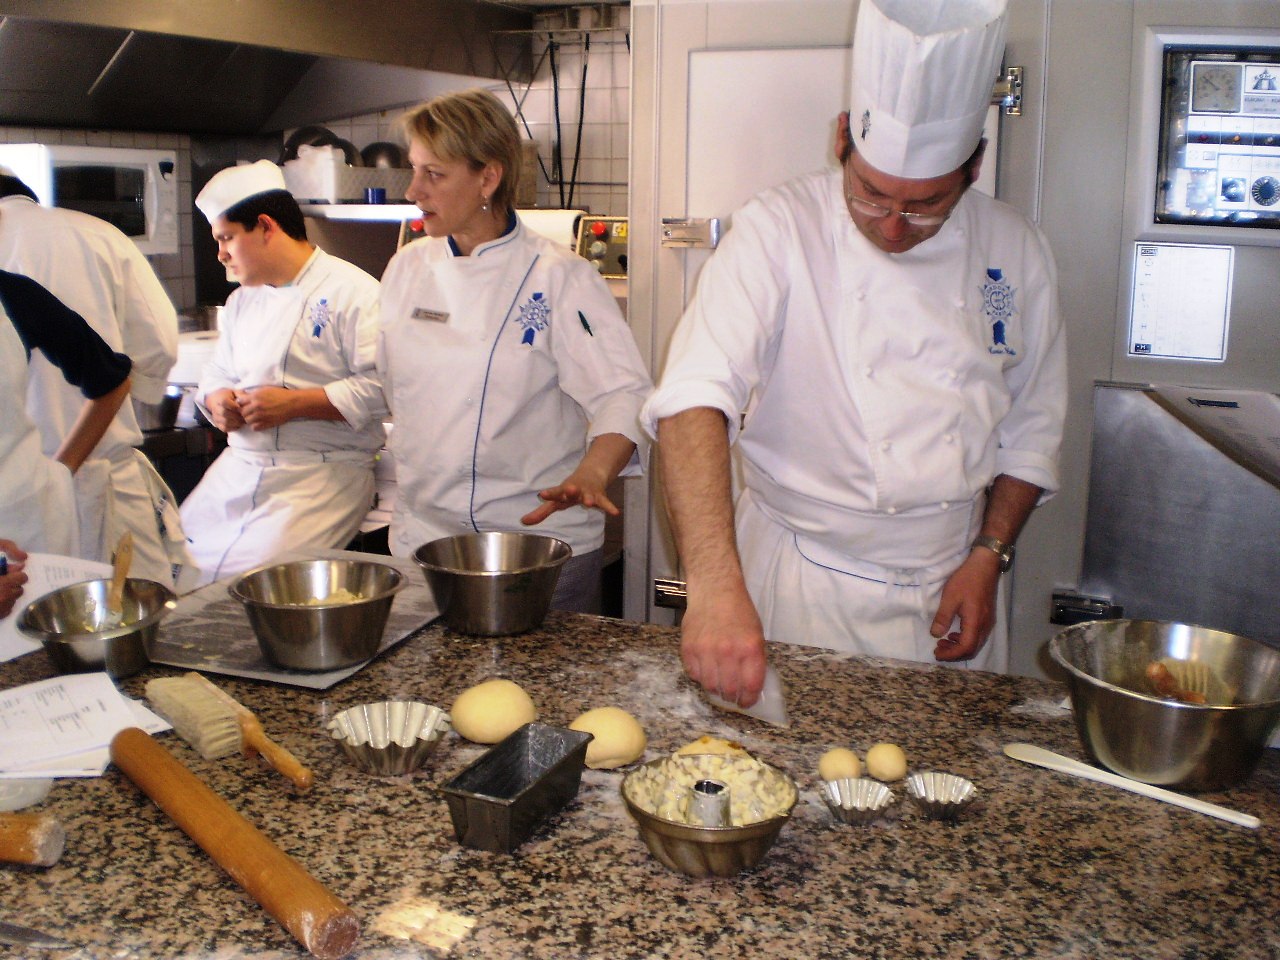 there are several chefs preparing food together in the kitchen